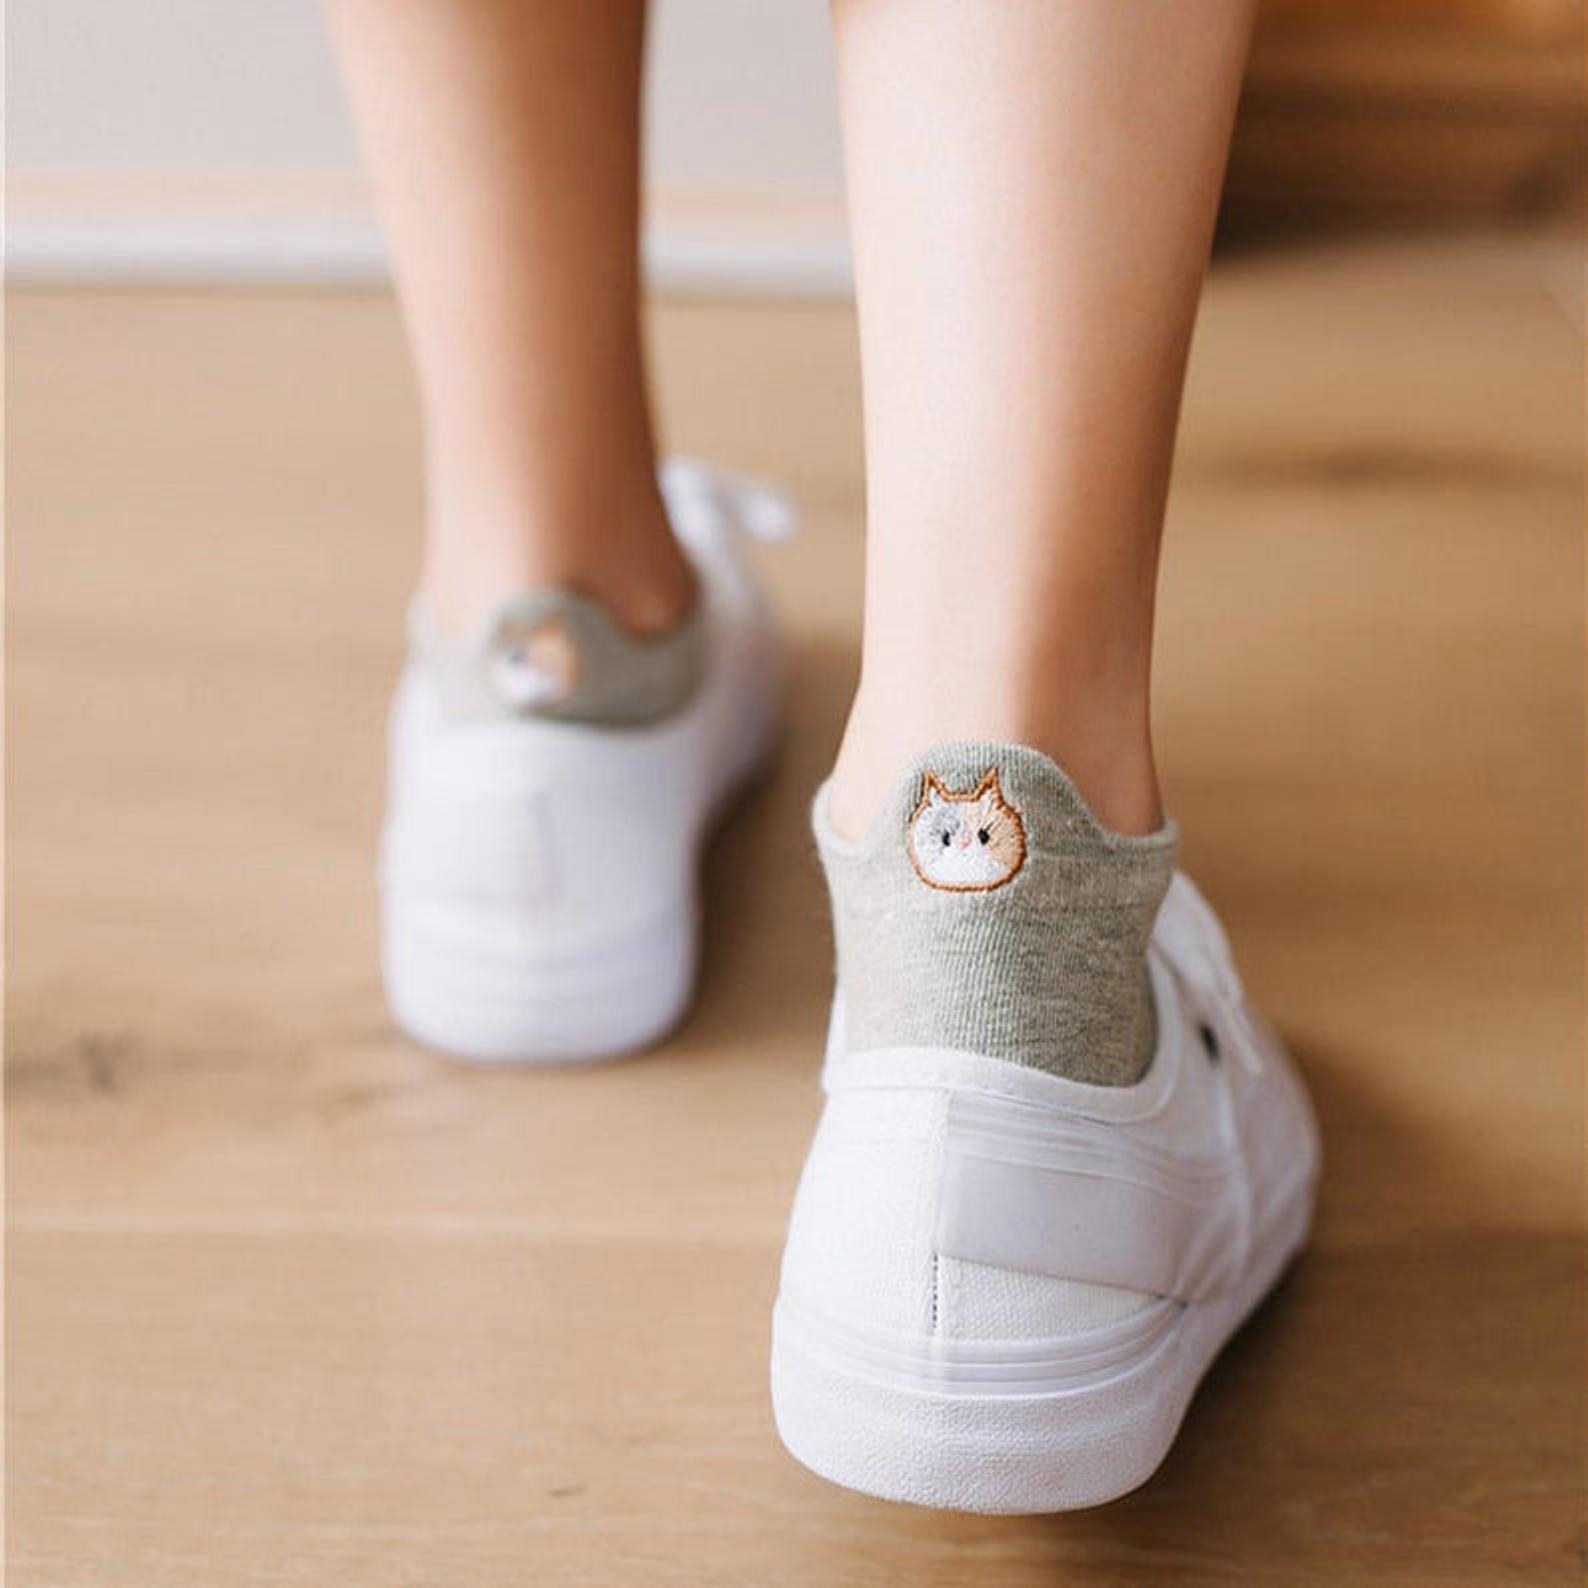 Model is wearing white tennis shoes with grey socks that have embroidered cats on the back